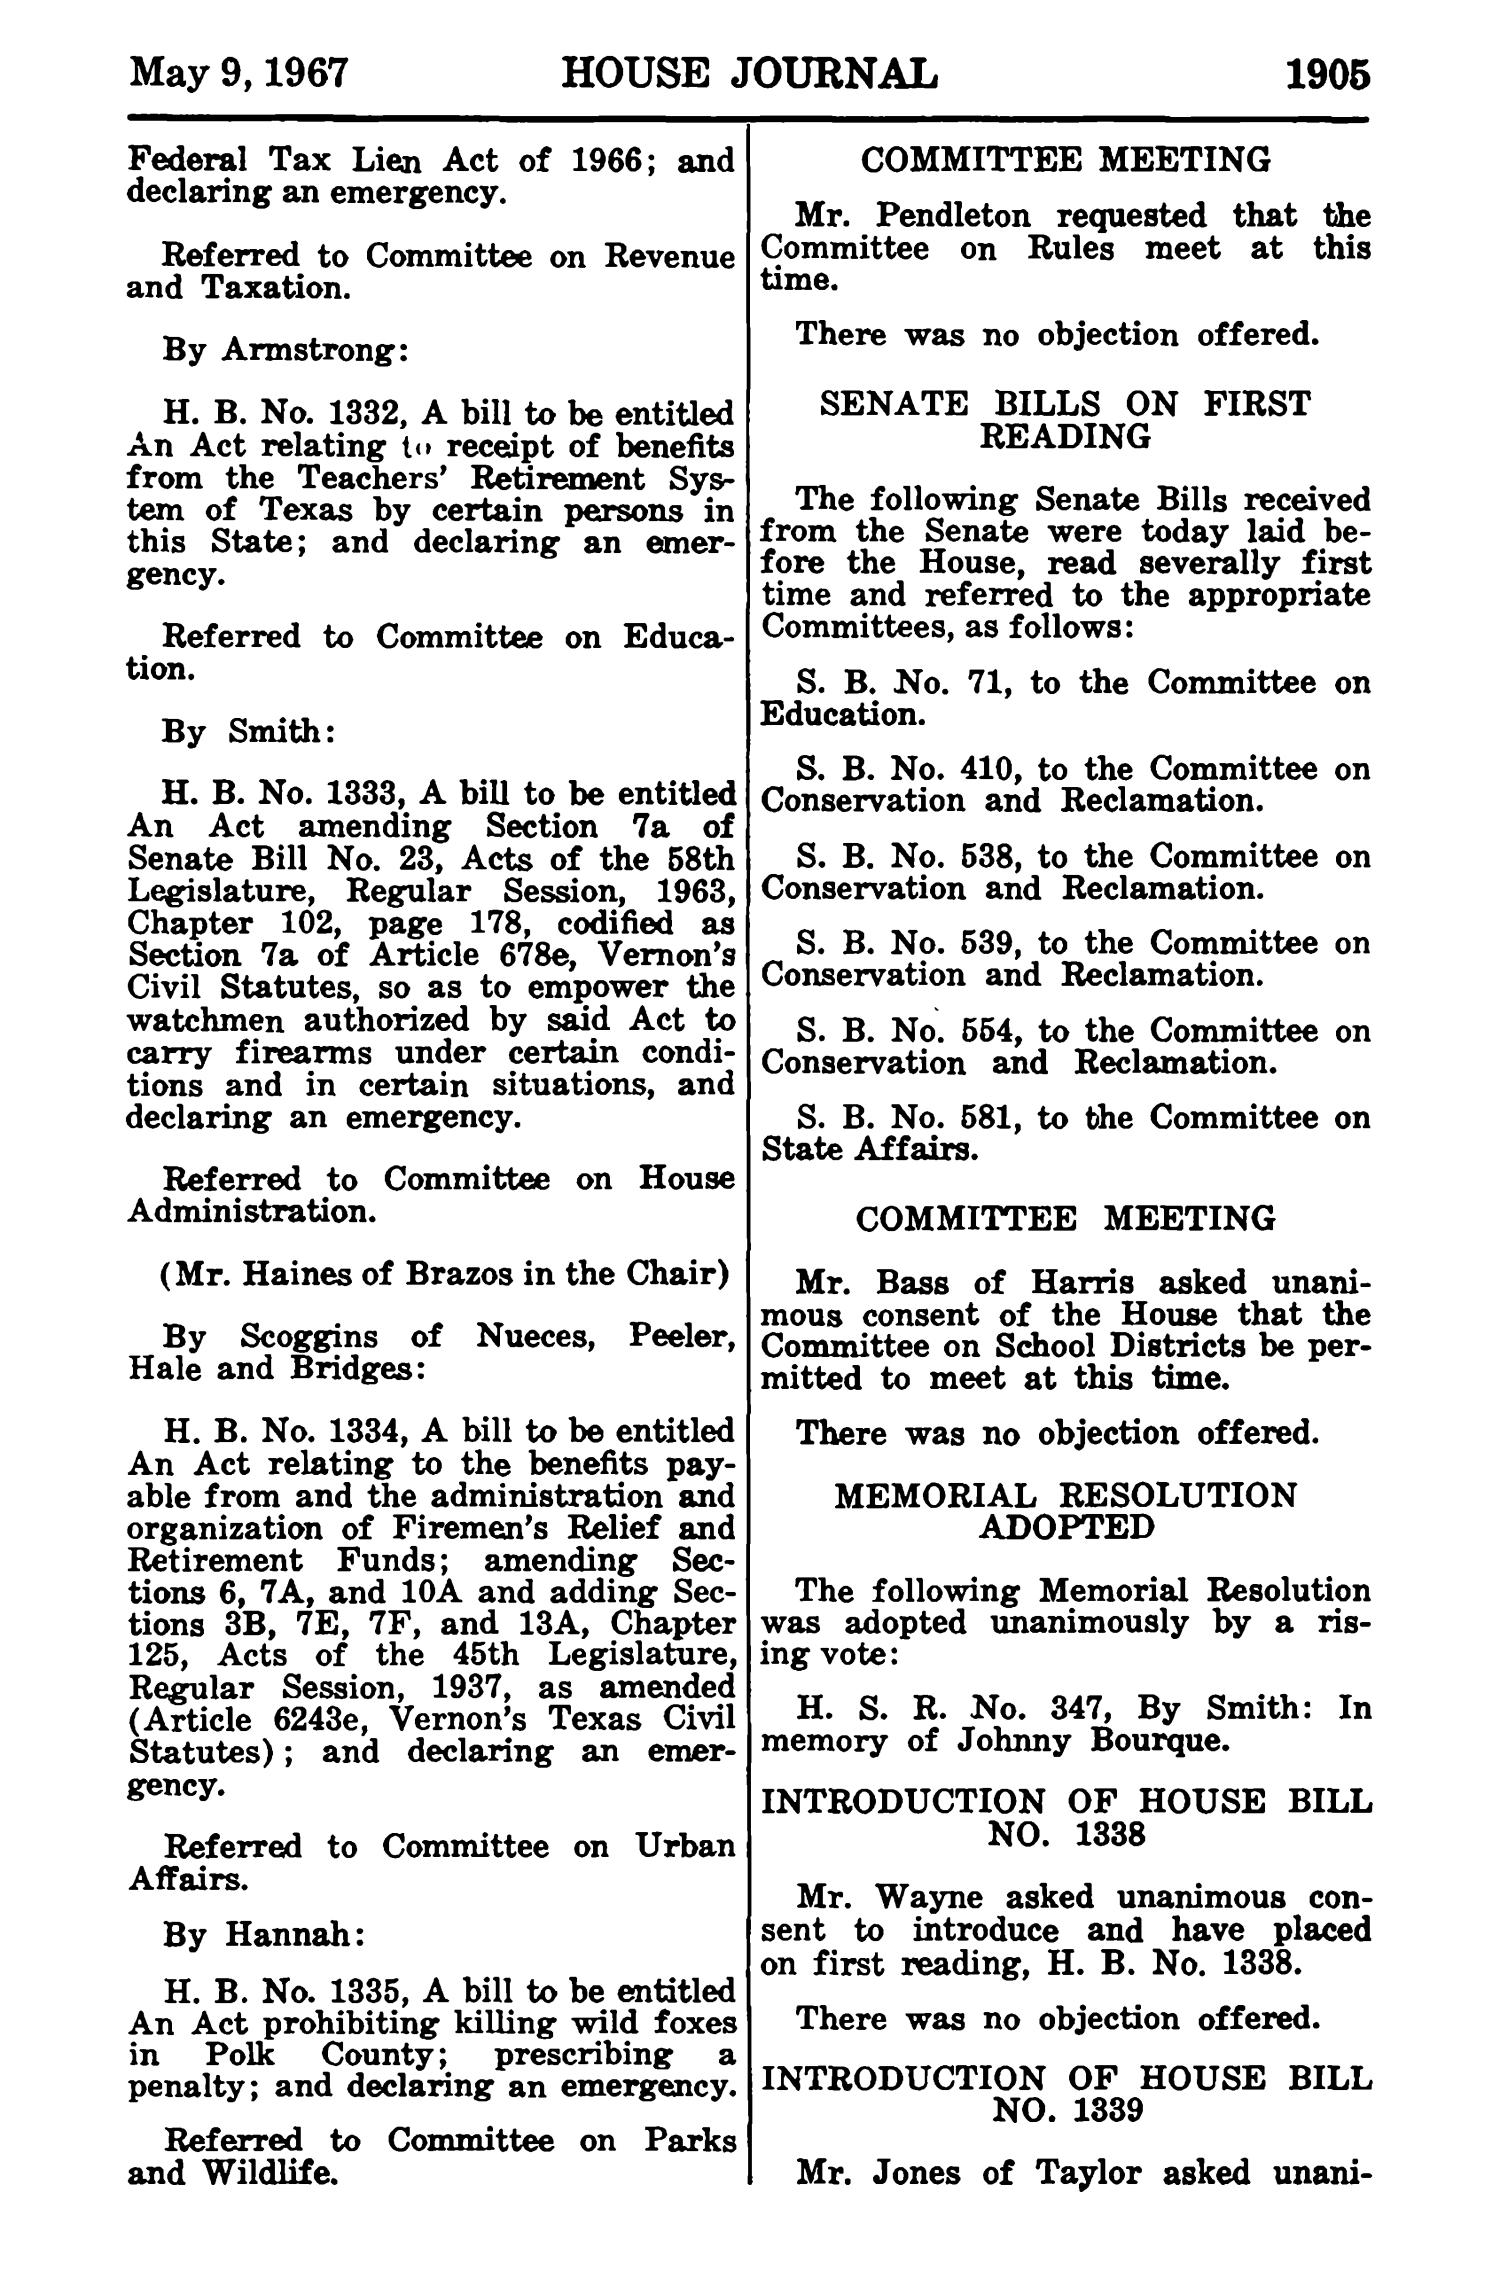 Journal of the House of Representatives of the Regular Session of the Sixtieth Legislature of the State of Texas, Volume 1
                                                
                                                    1905
                                                